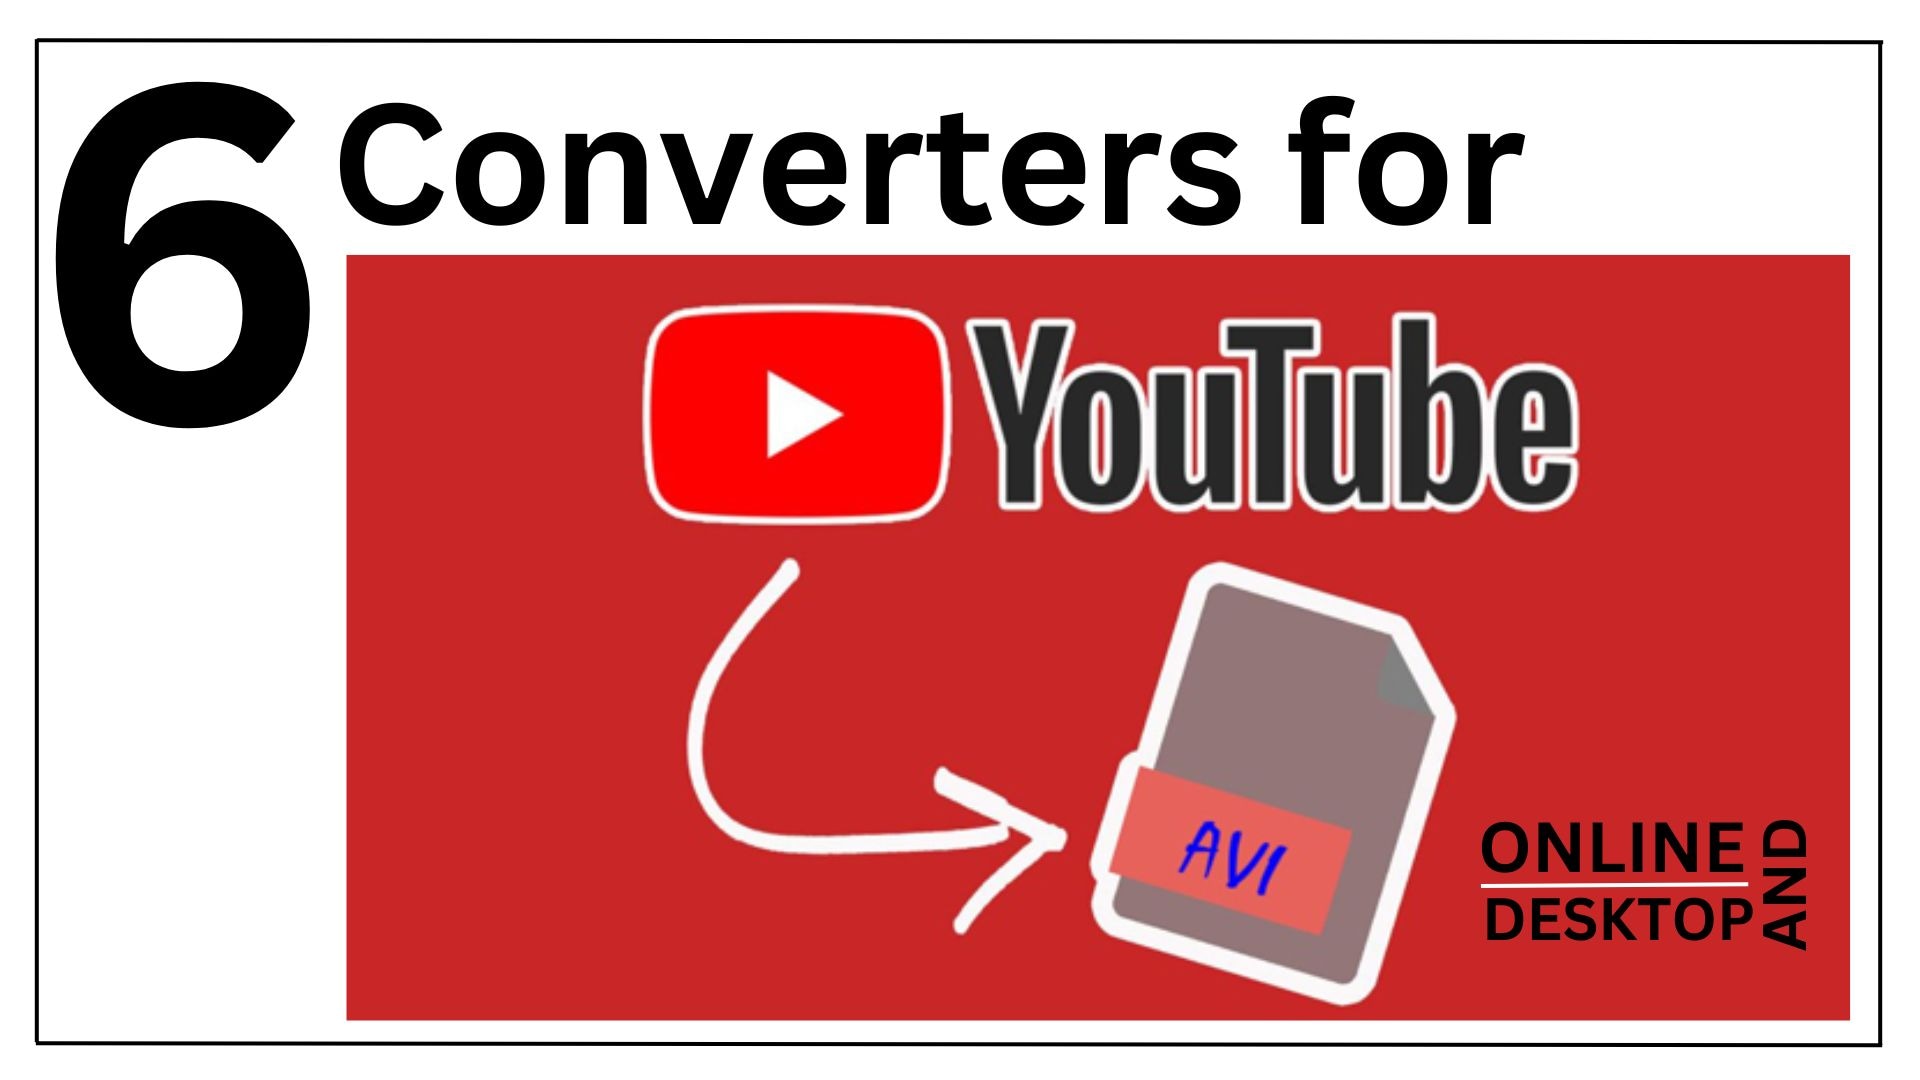 YouTube to AVI File Format? Use These 6 Online and Desktop Converters!